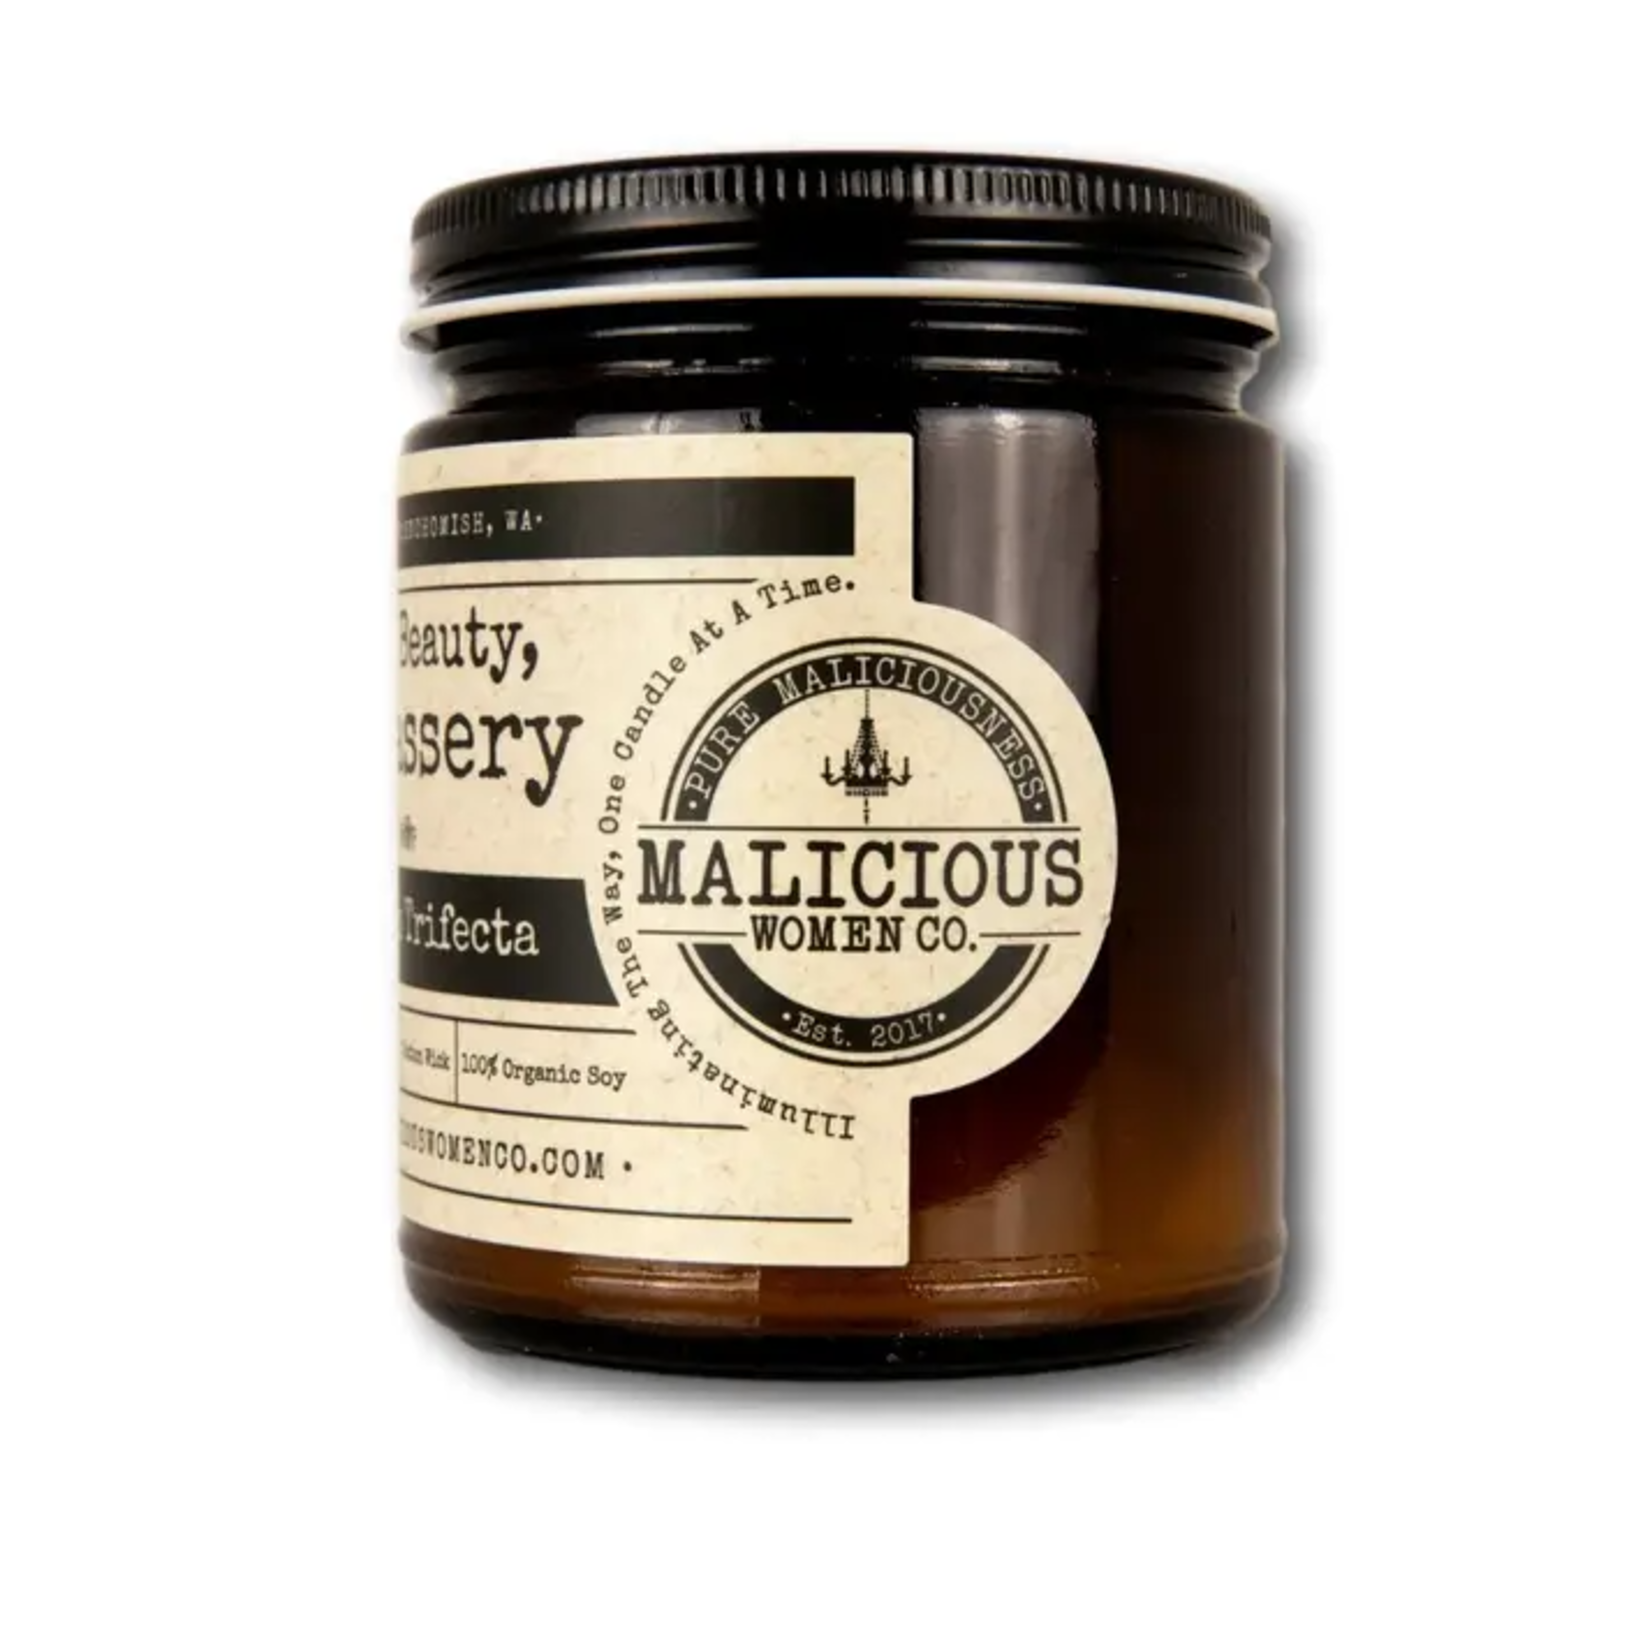 Malicious Woman Candle Co. Brains, Beauty, & Badassery Candle